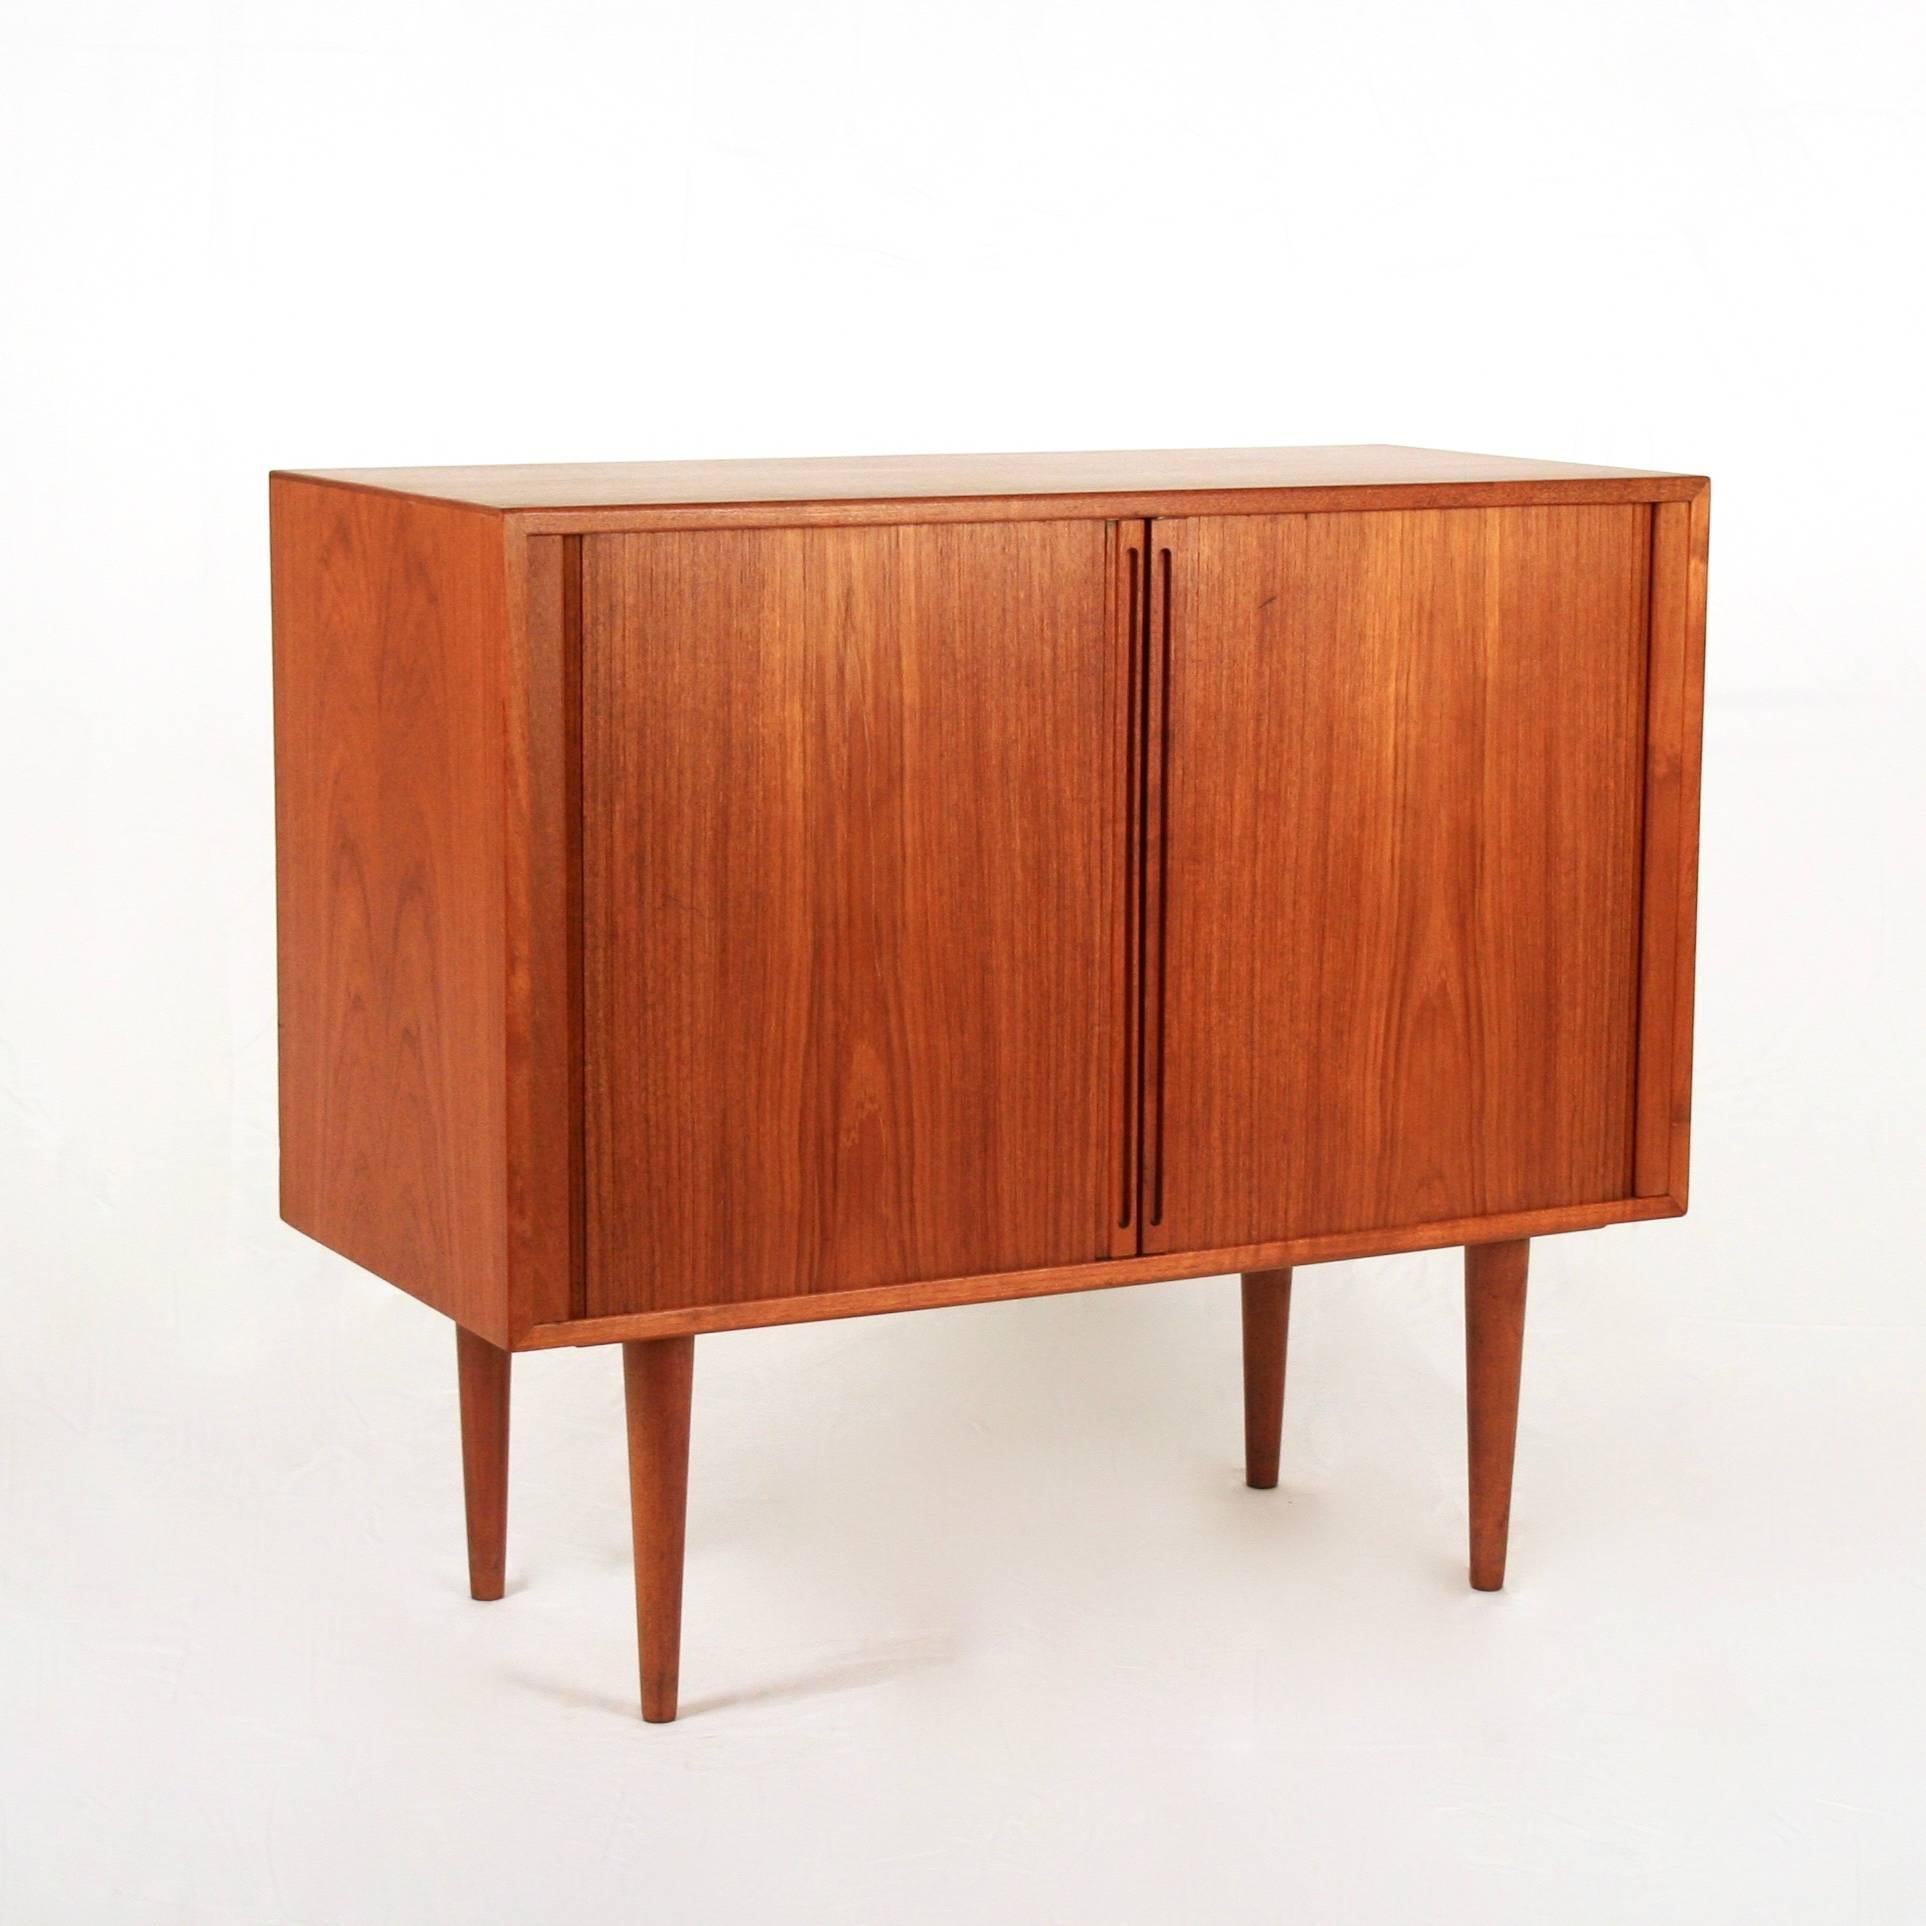 A lovely small-scale cabinet with warm teak patina and tambour doors that slide out of sight. With conical legs and a clean design, this piece is a great storage solution for media or anything else you desire. Designed by world renowned Danish